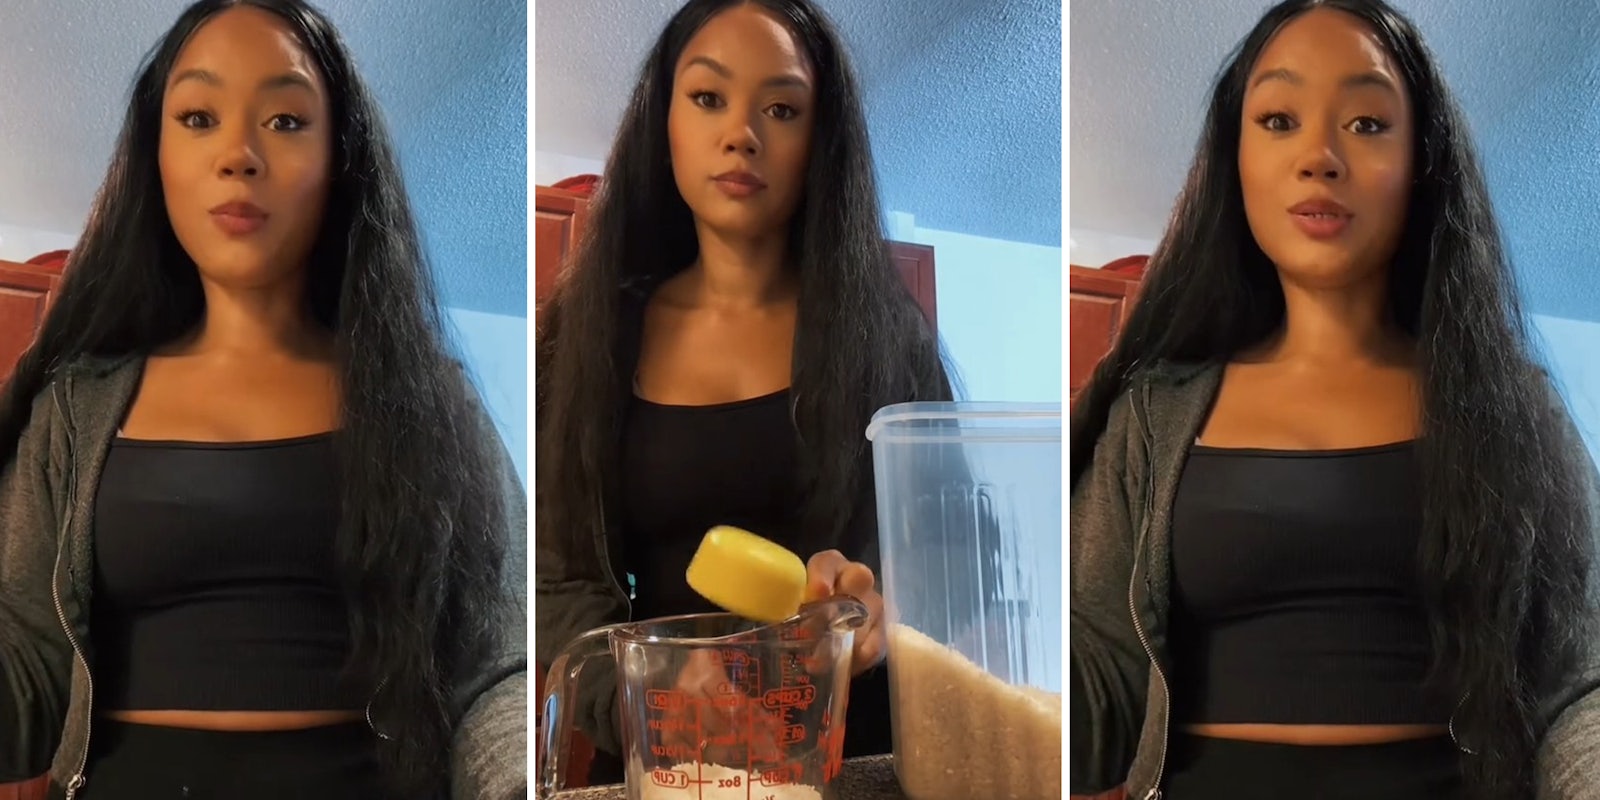 Woman says she lost 2 pounds in 5 days through ‘Rice-zempic’ hack